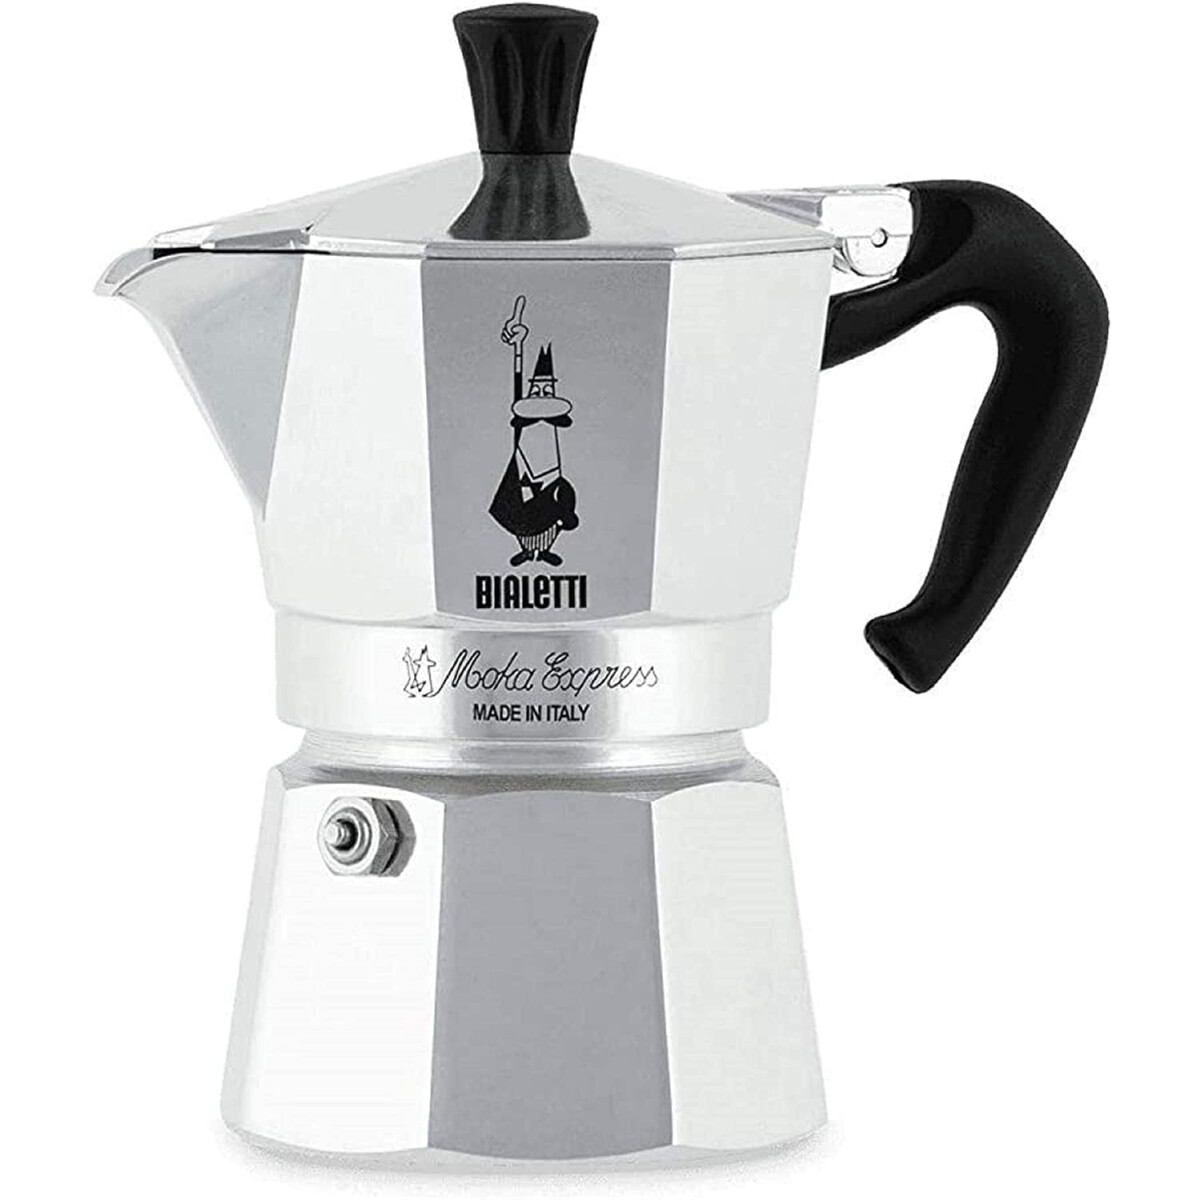 Bialetti 0001162 Moka ExpresDie Tradition "Made in...